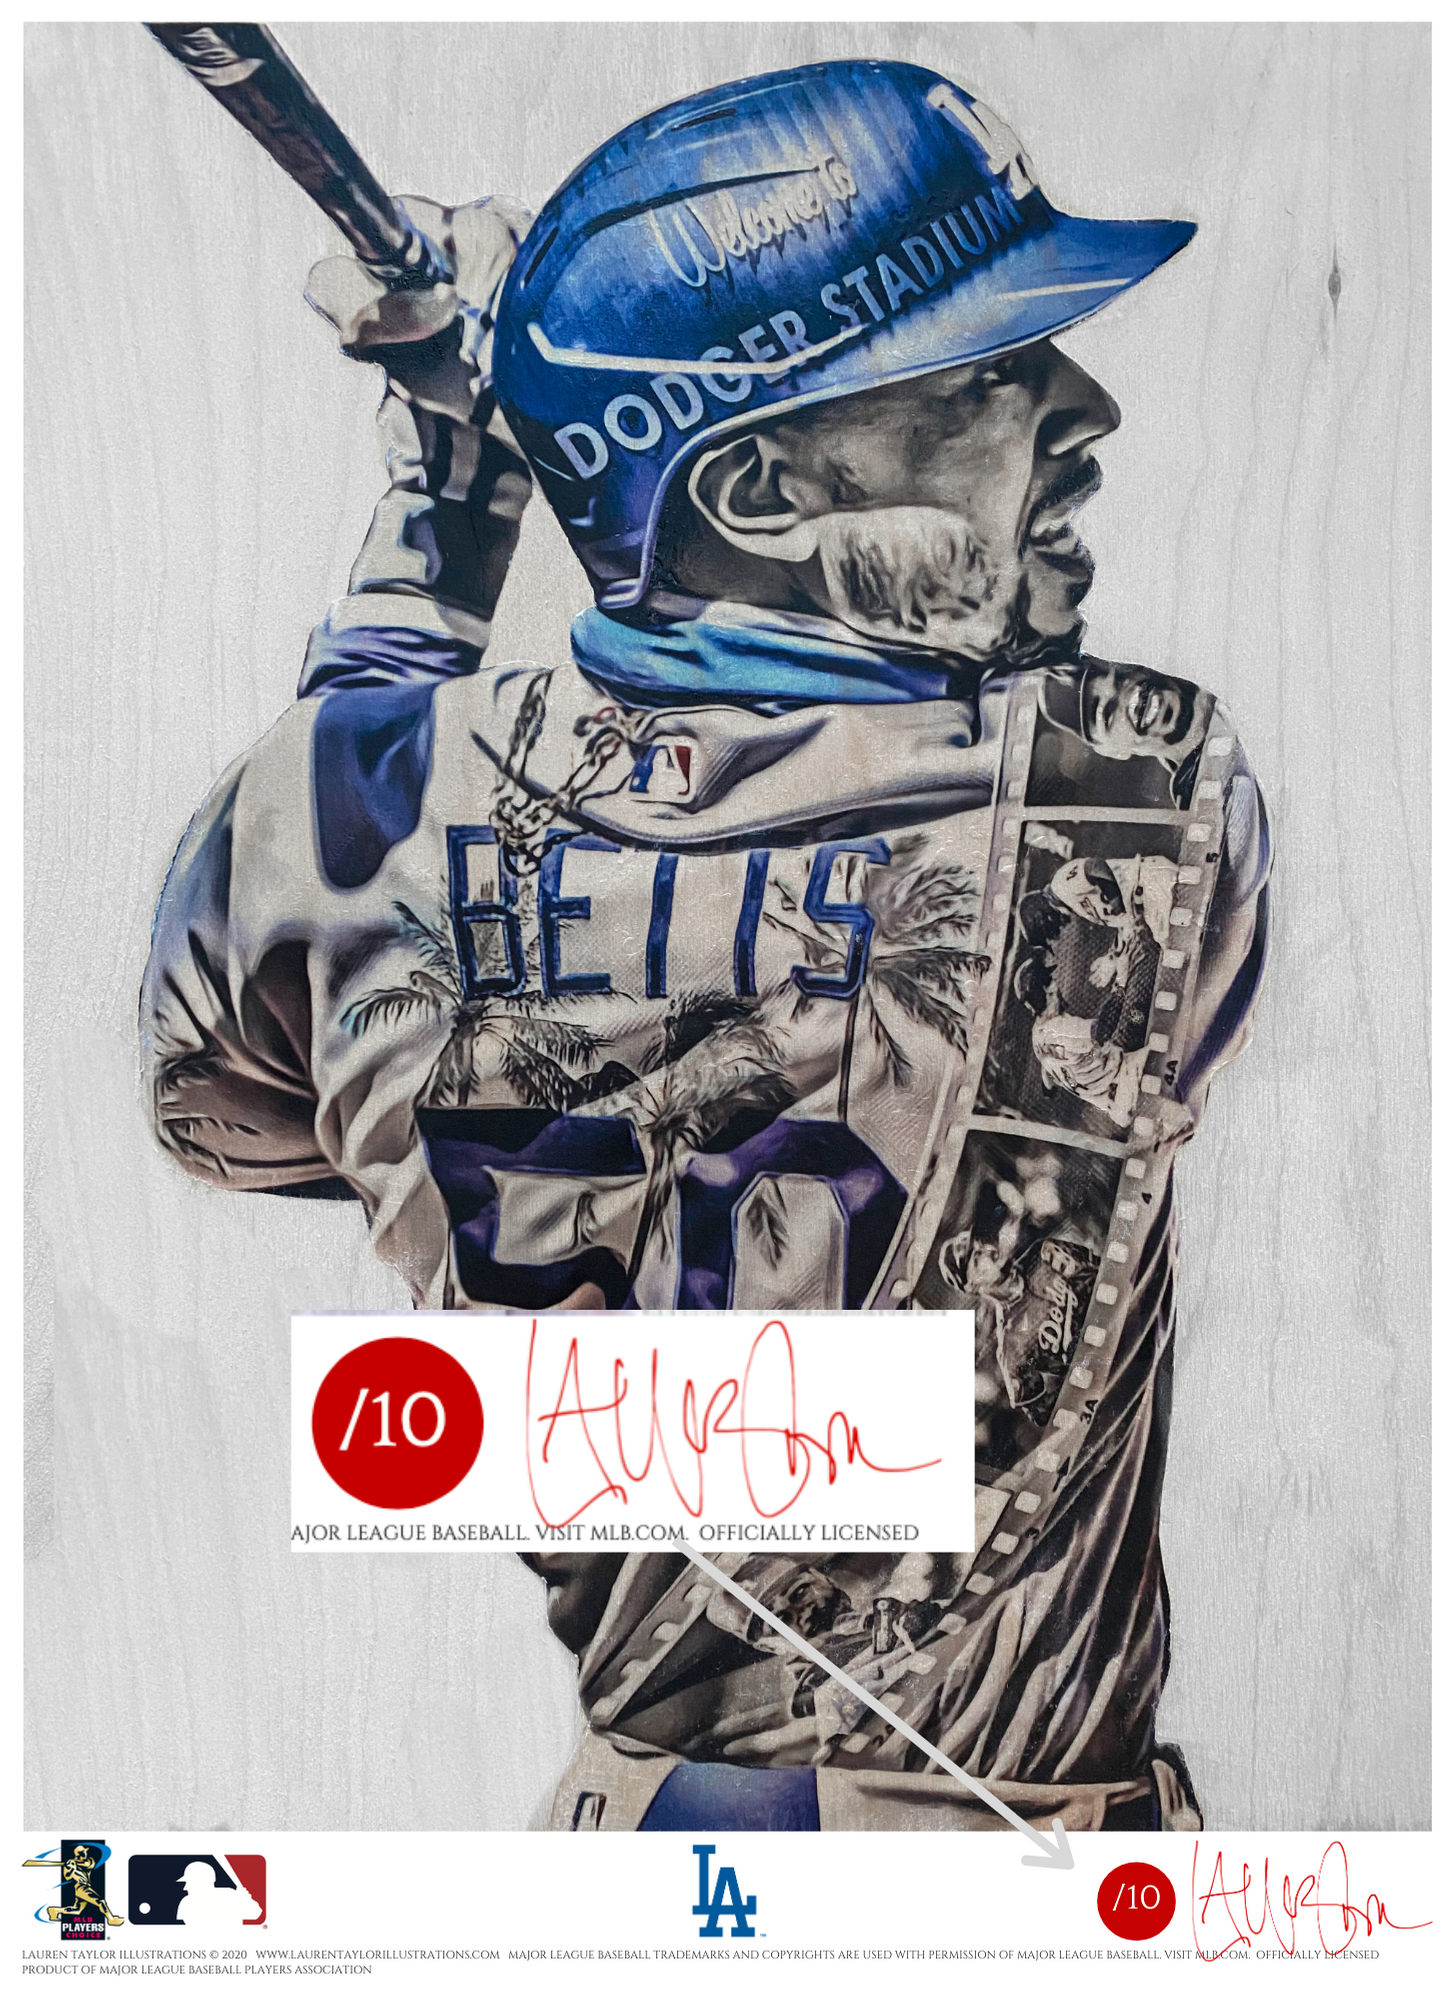 Welcome to LA (Mookie Betts) Los Angeles Dodgers - Officially Licensed  MLB Print - RED SIGNATURE LIMITED RELEASE /10